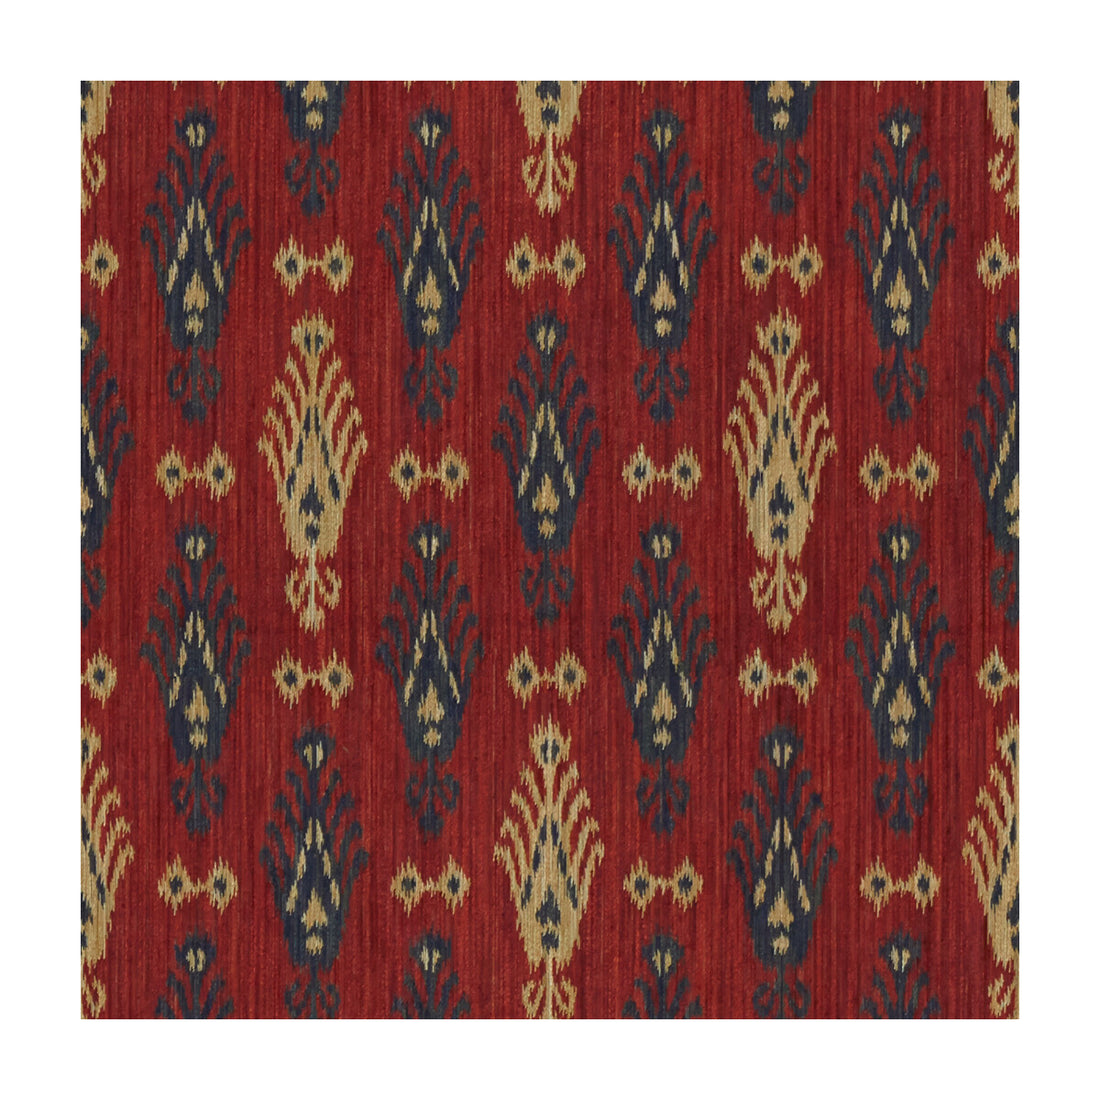 Adras fabric in durango color - pattern 29626.519.0 - by Kravet Design in the Museum Of New Mexico collection